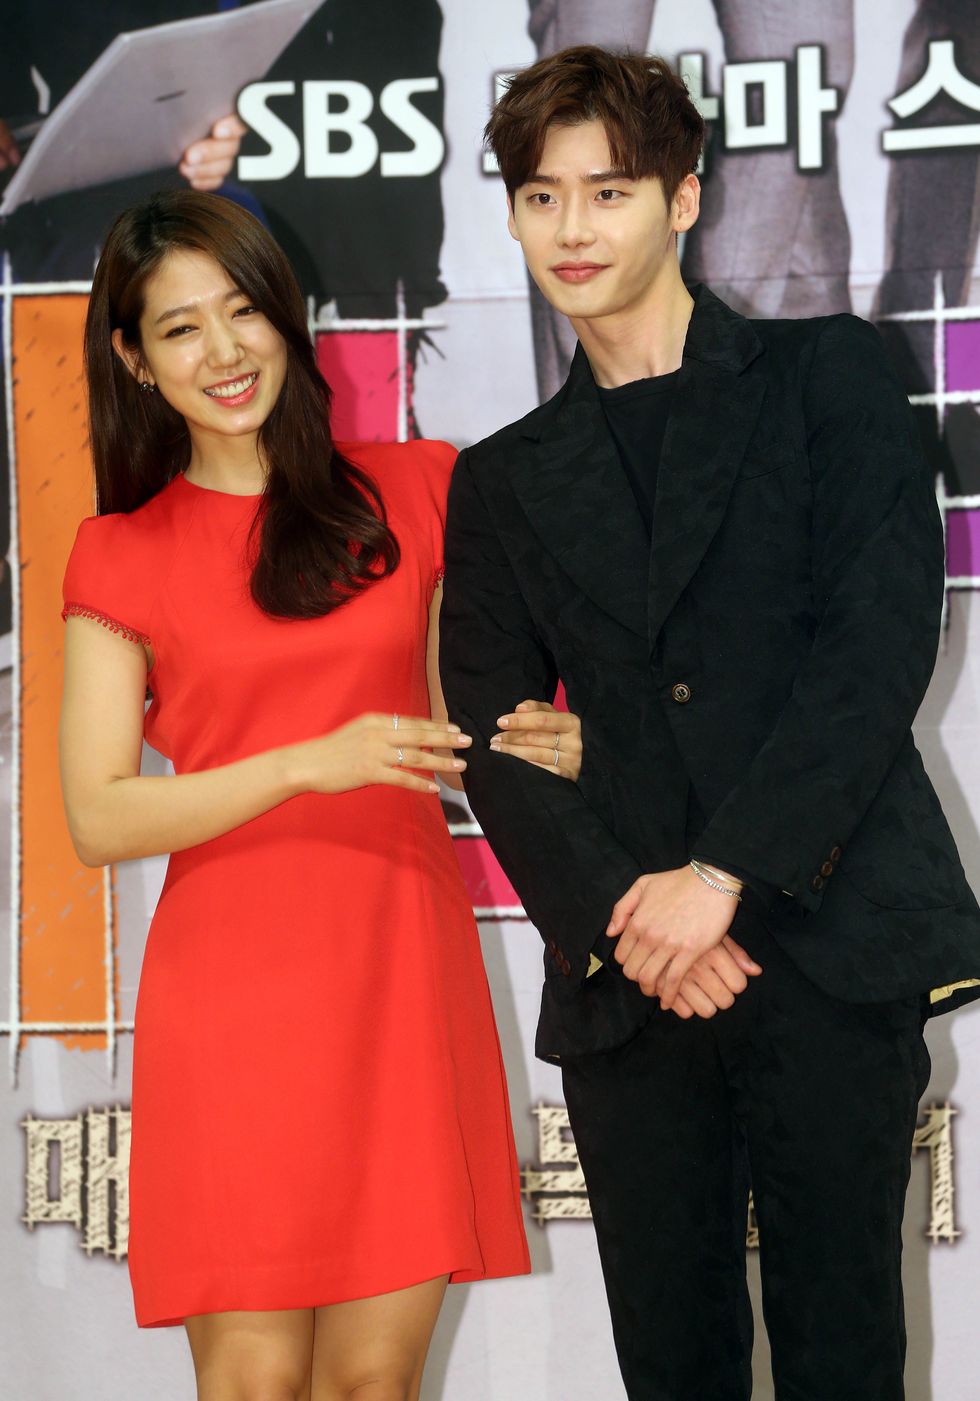 s korean actress park shin hye and actor lee jong suk
south korean actress park shin hye and actor lee jong suk, who star in the new drama "pinocchio," pose for a photo during a publicity event in seoul on nov 6, 2014 the first episode of the drama will be aired by the sbs tv network on nov 12 yonhap2014 11 06 162159
copyright ⓒ 1980 2014 yonhapnews agency all rights reserved